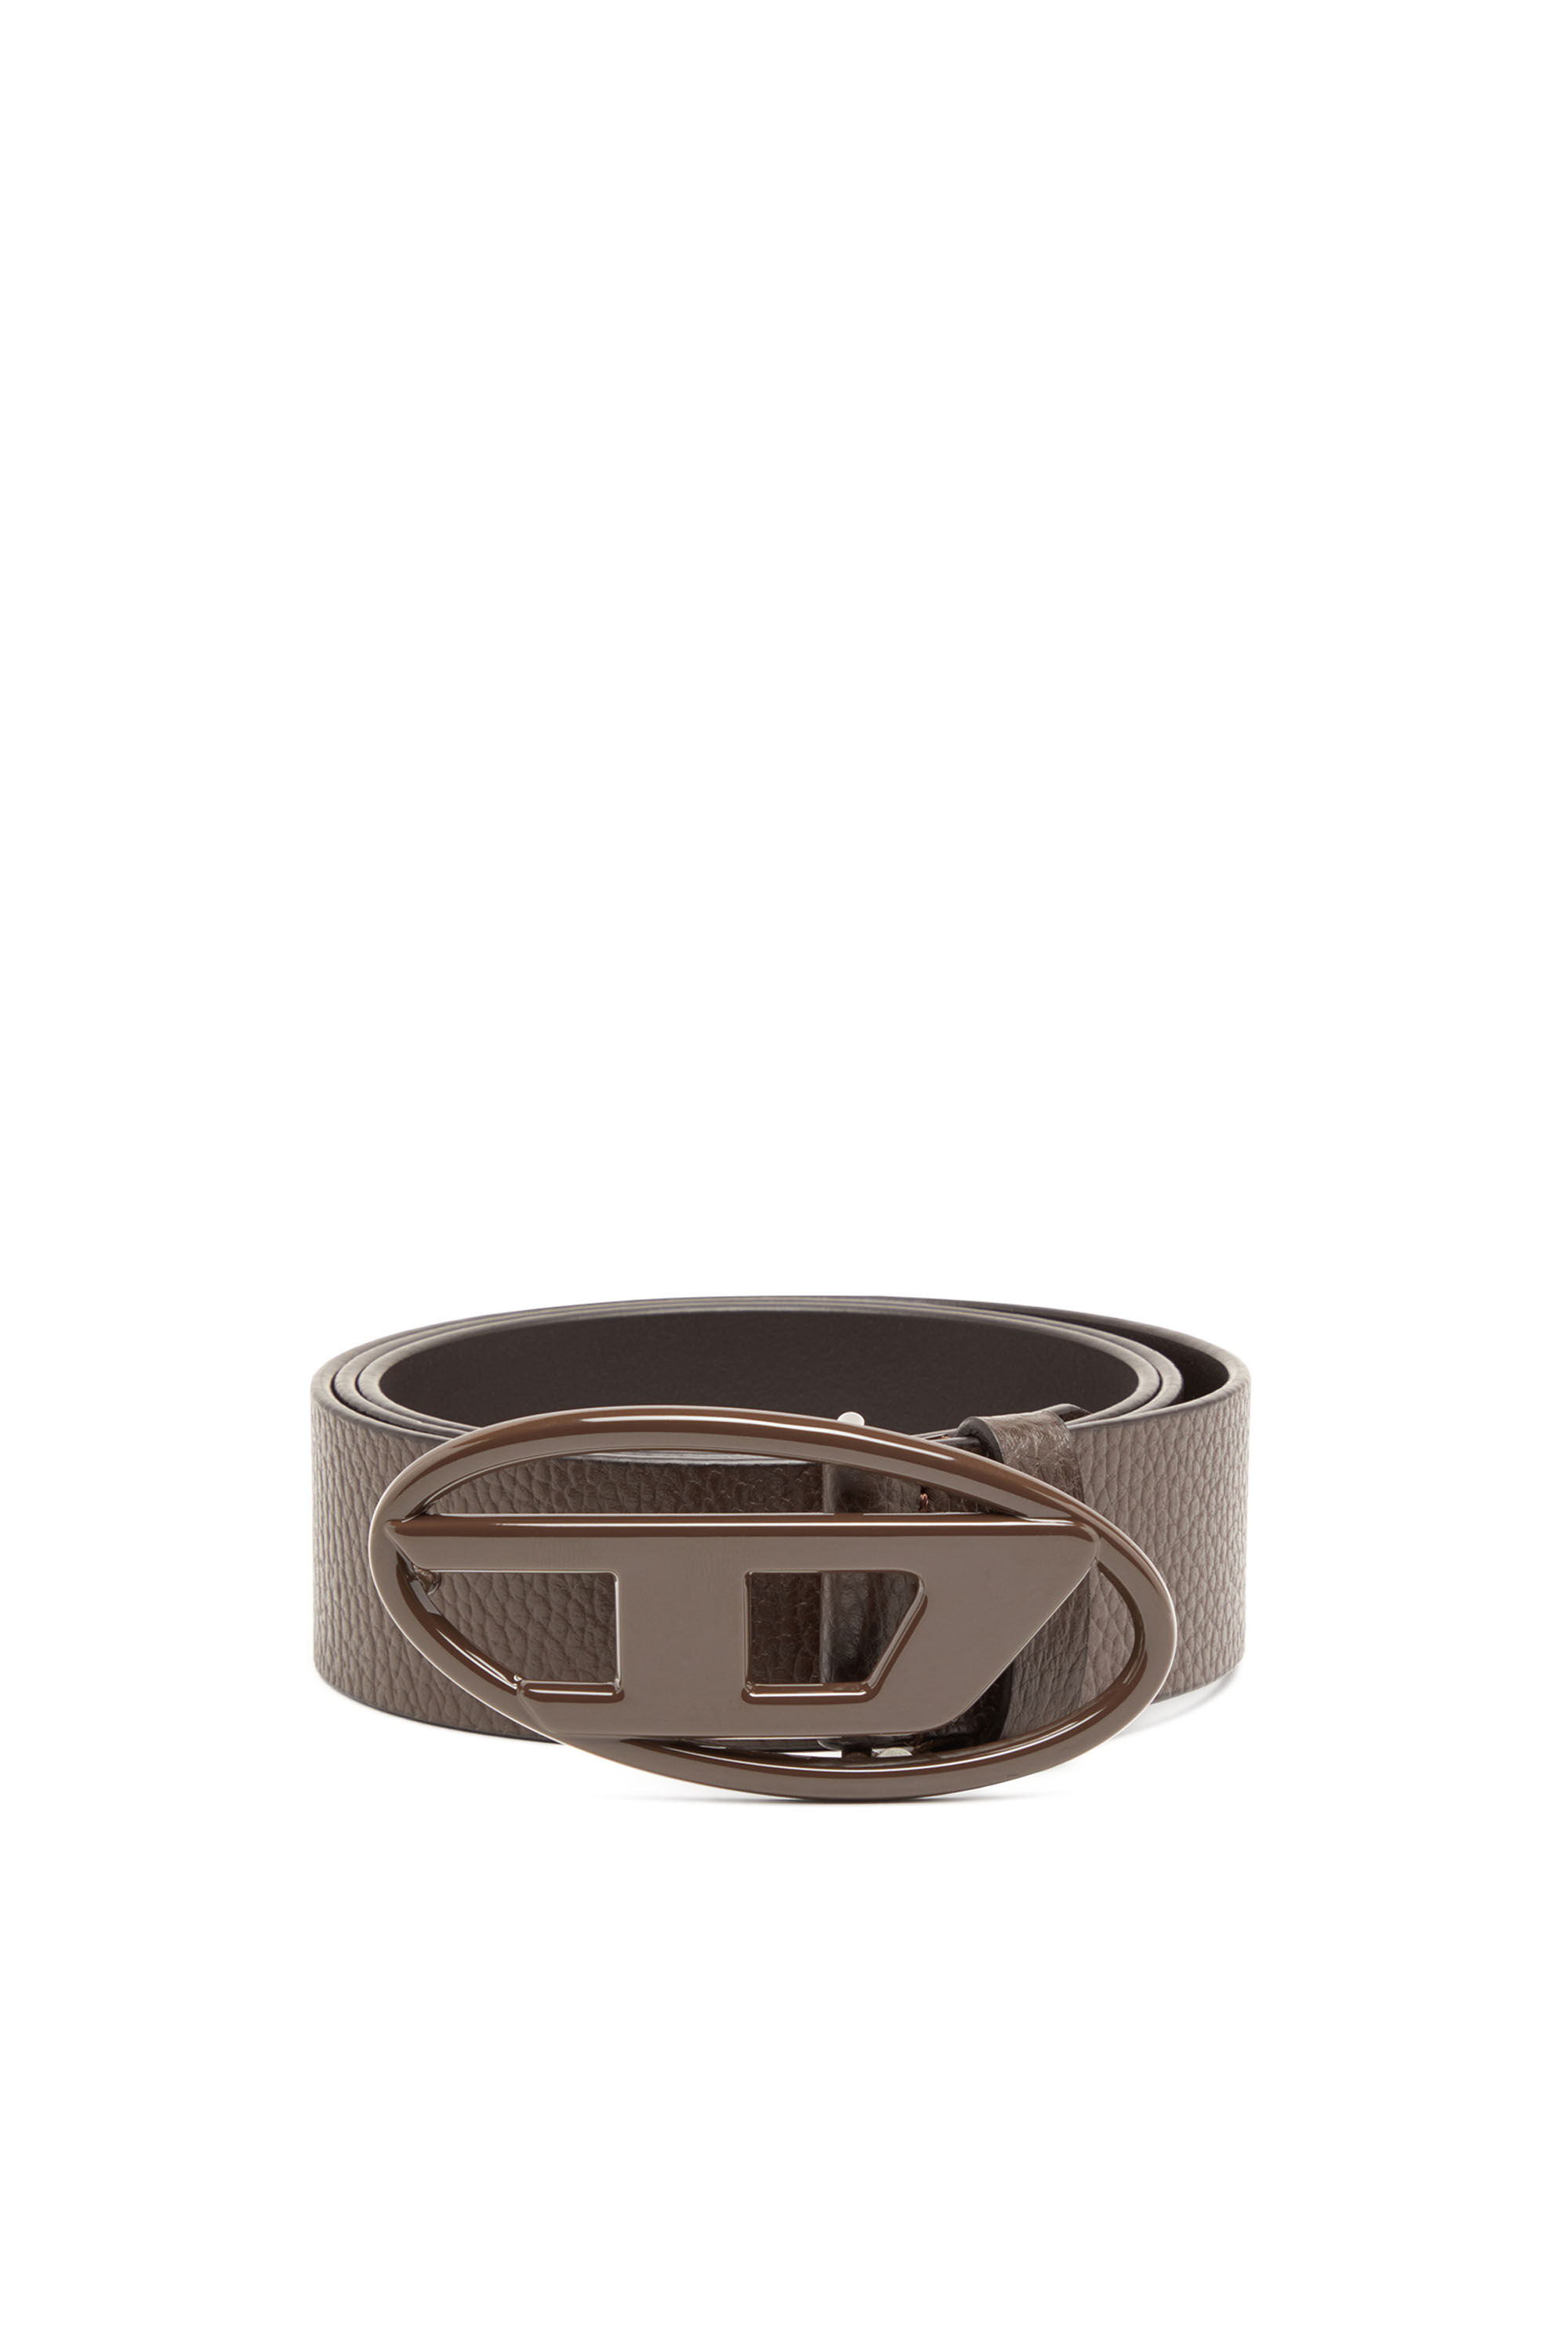 B-1DR Leather belt with matte buckle｜ブラウン｜ウィメンズ｜DIESEL